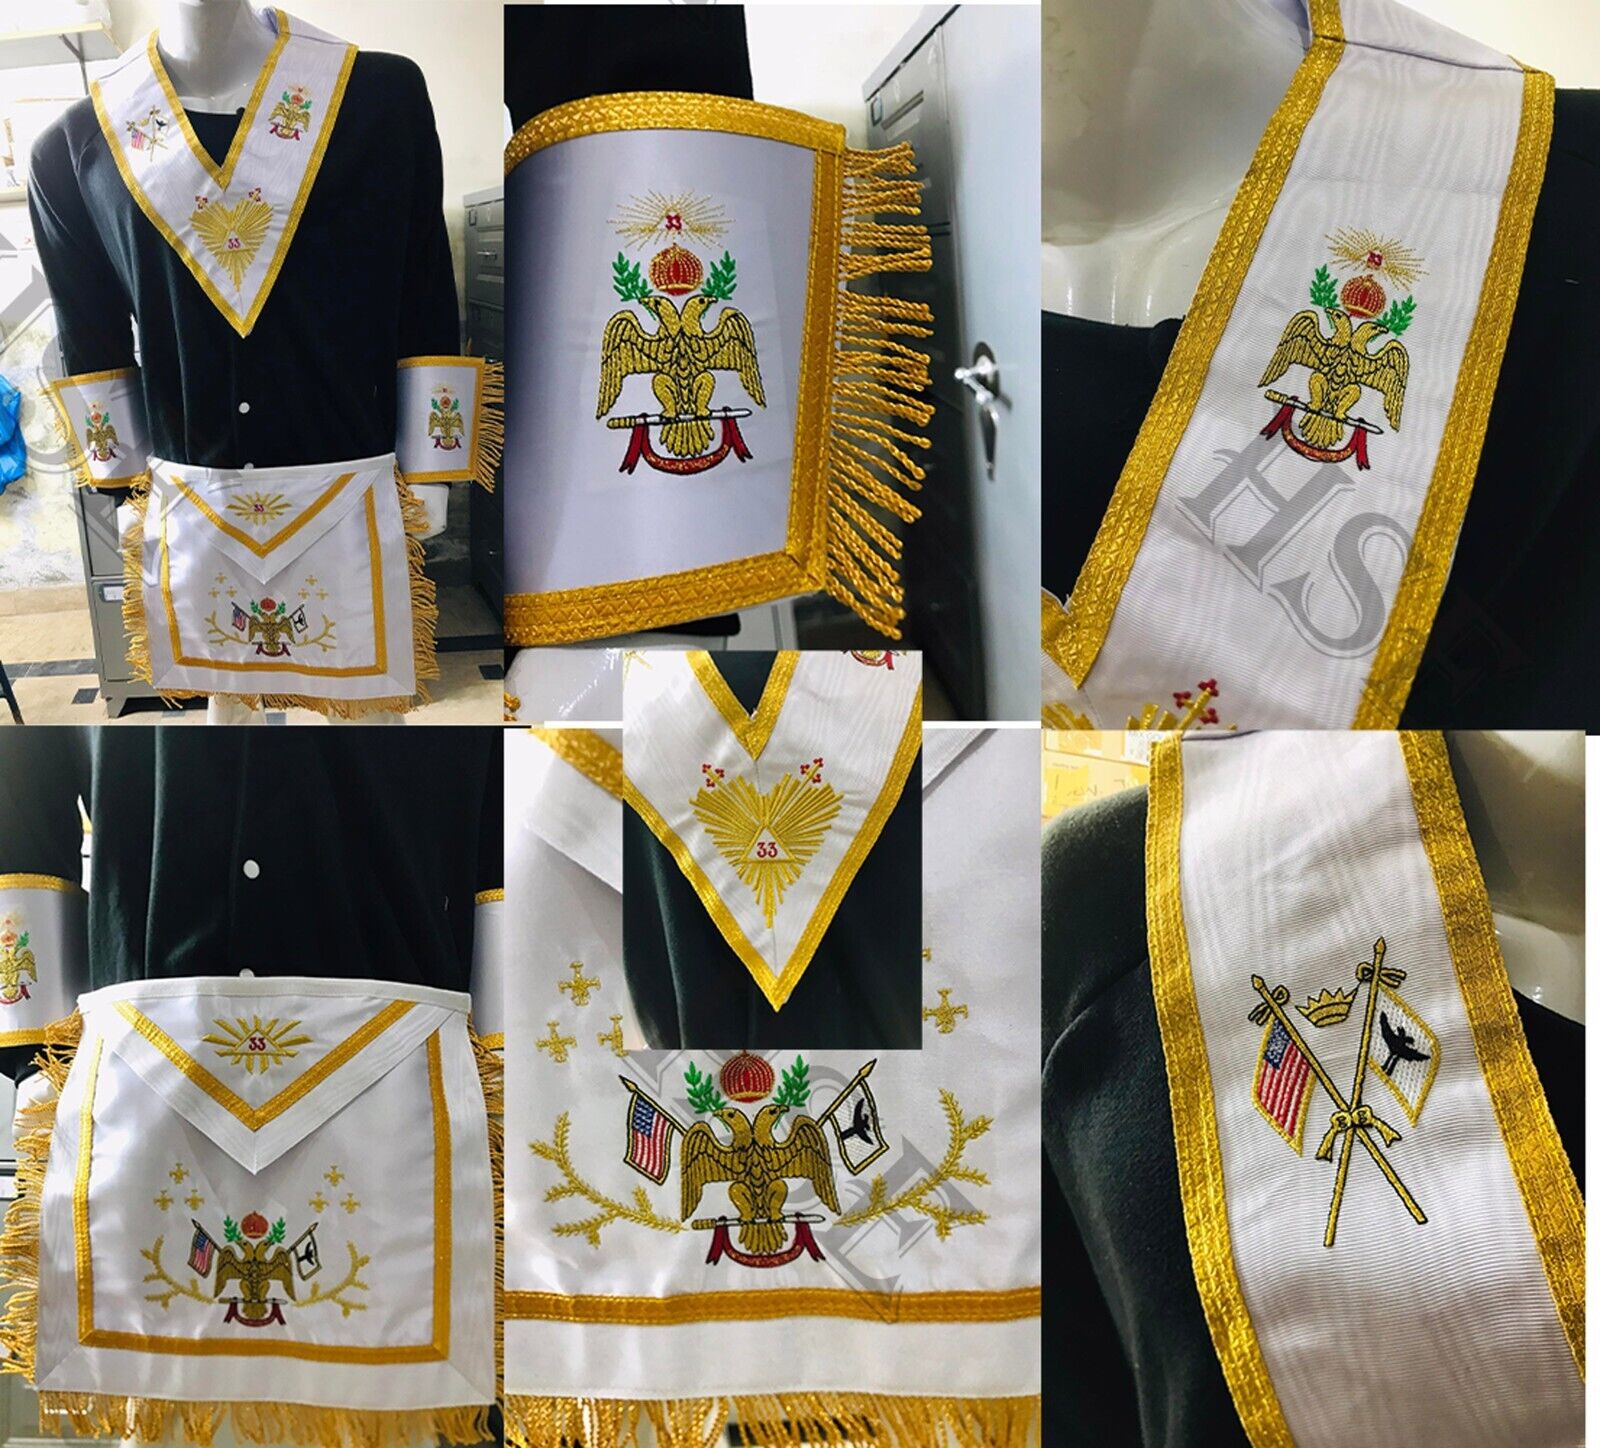 SCOTTISH RITE 33RD DEGREE APRON WITH CUFFS & COLLAR GOLD EMBROIDERY DOWN WINGS